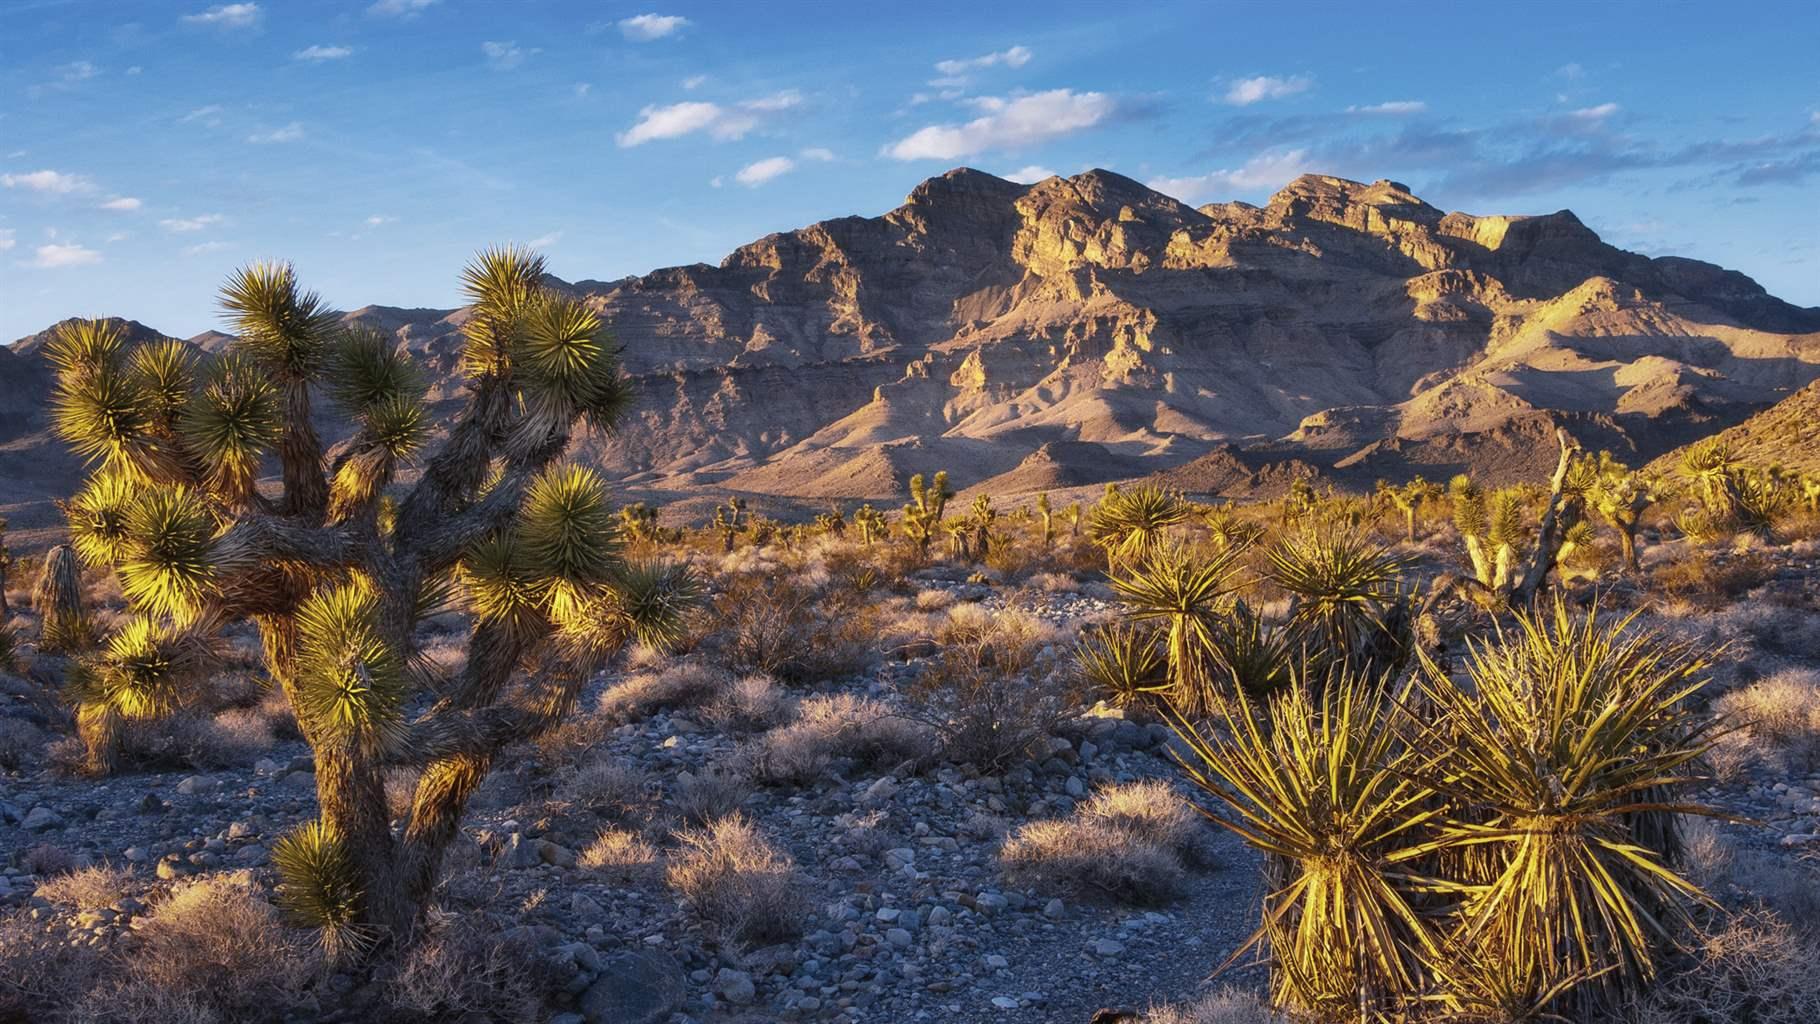 Limestone cliffs, Joshua trees, and Spanish bayonet yucca are typical landscape features of the Desert National Wildlife Refuge